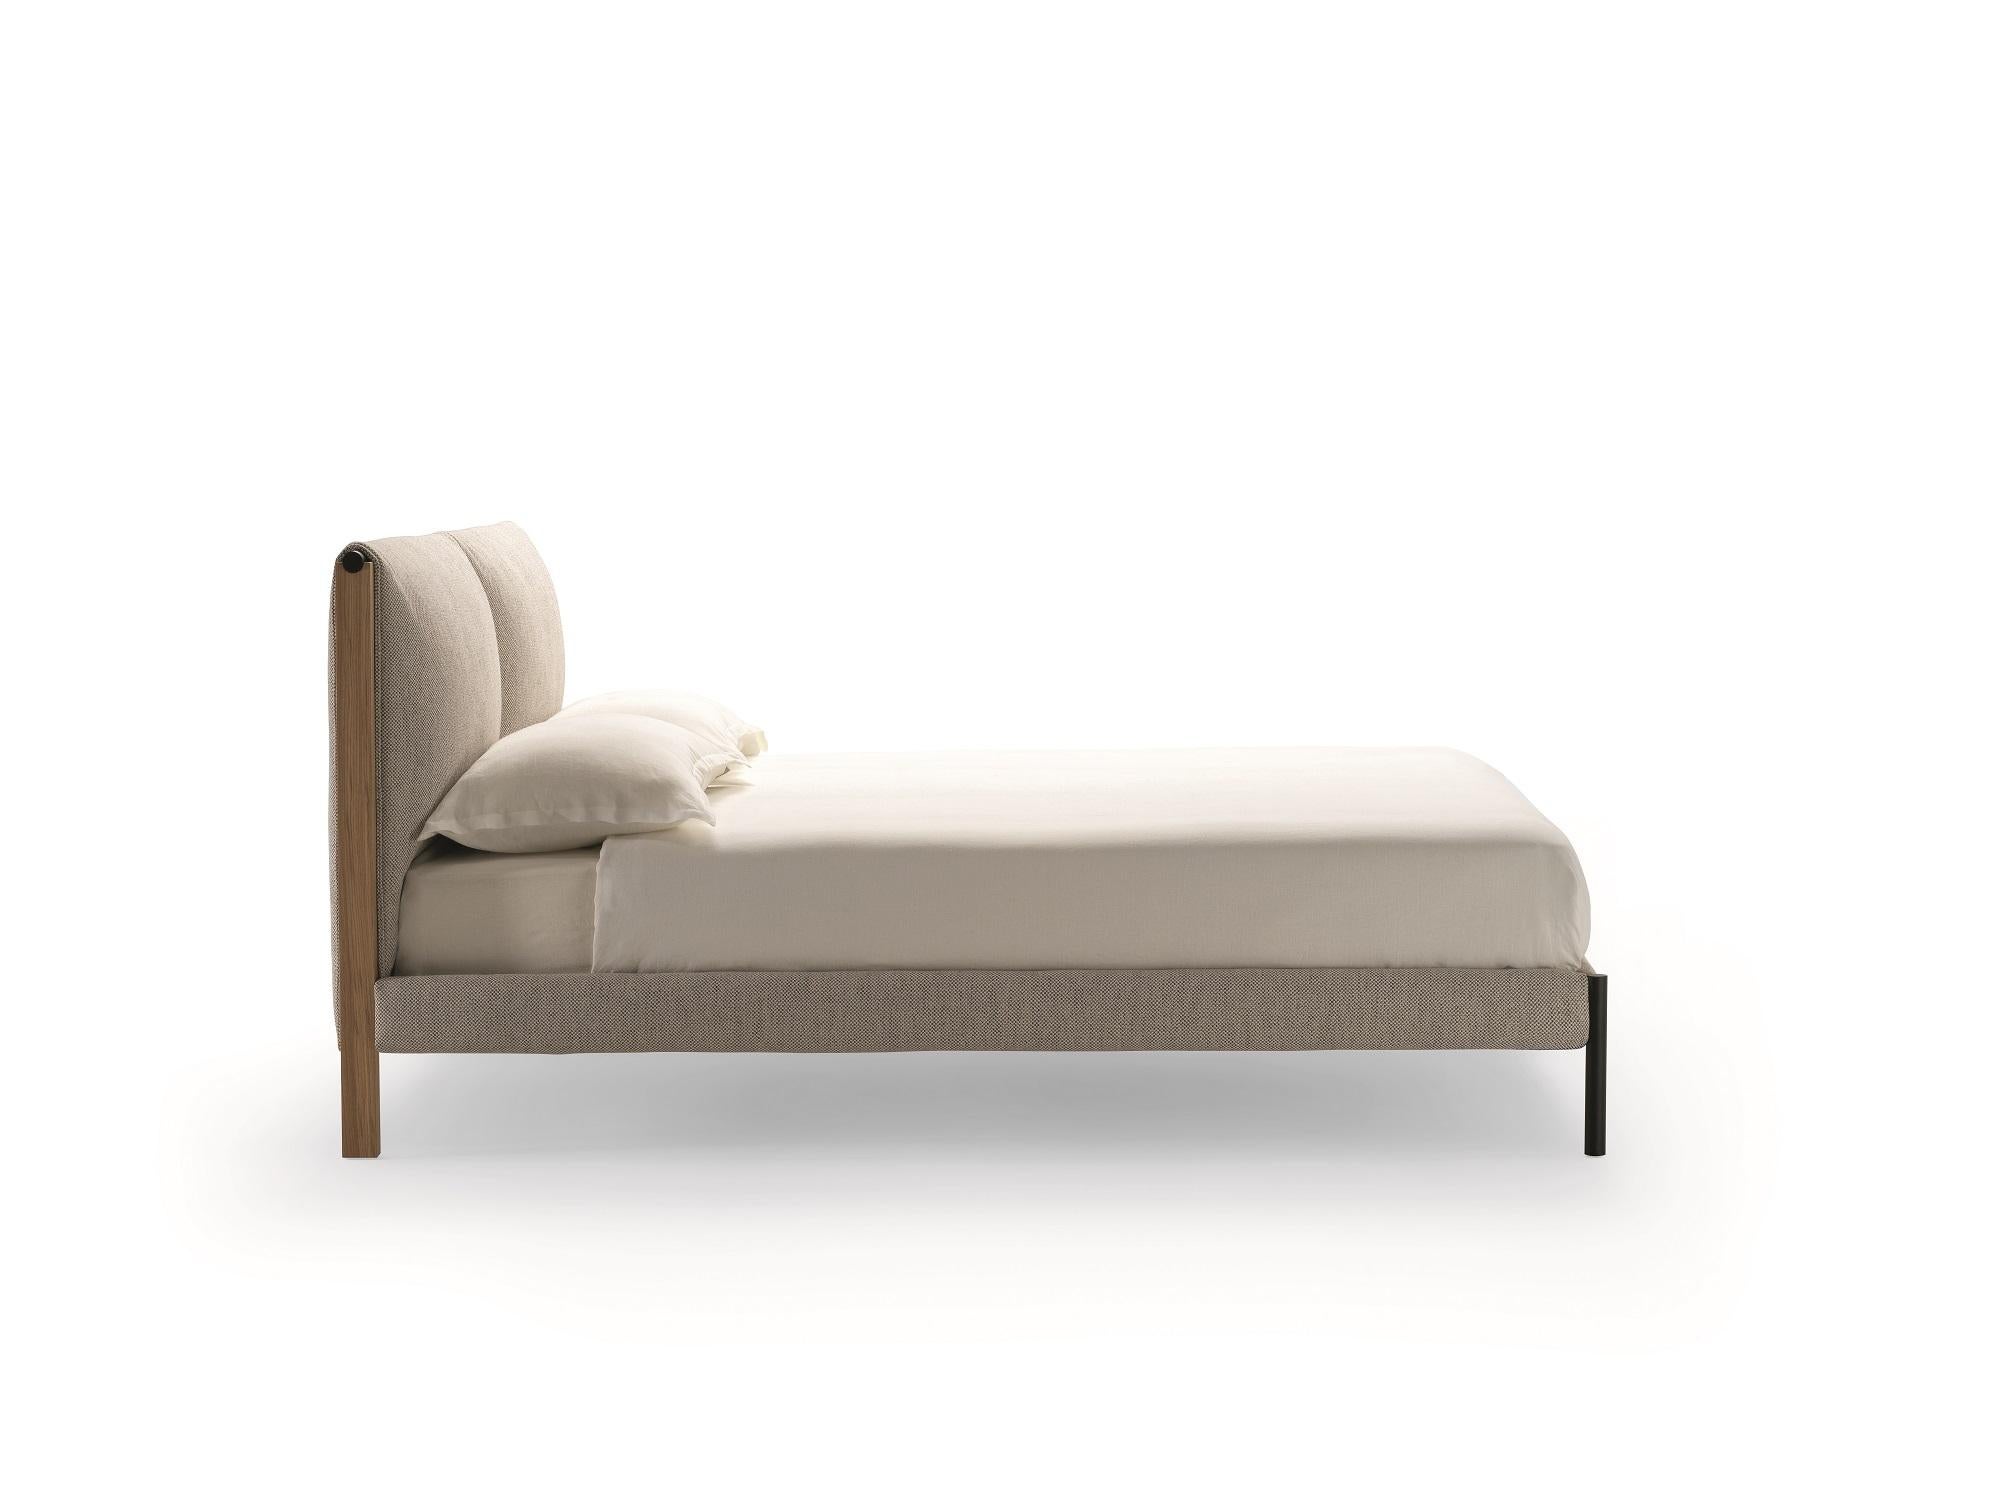 Zanotta King Size Ricordi Bed with Separate Springing in Toce Upholstery by Spalvieri & Del Ciotto

Bed with separate springing. Headboard frame in natural or in open pore black painted oak. Upholstery in polyurethane/heat-bound polyester fibre.